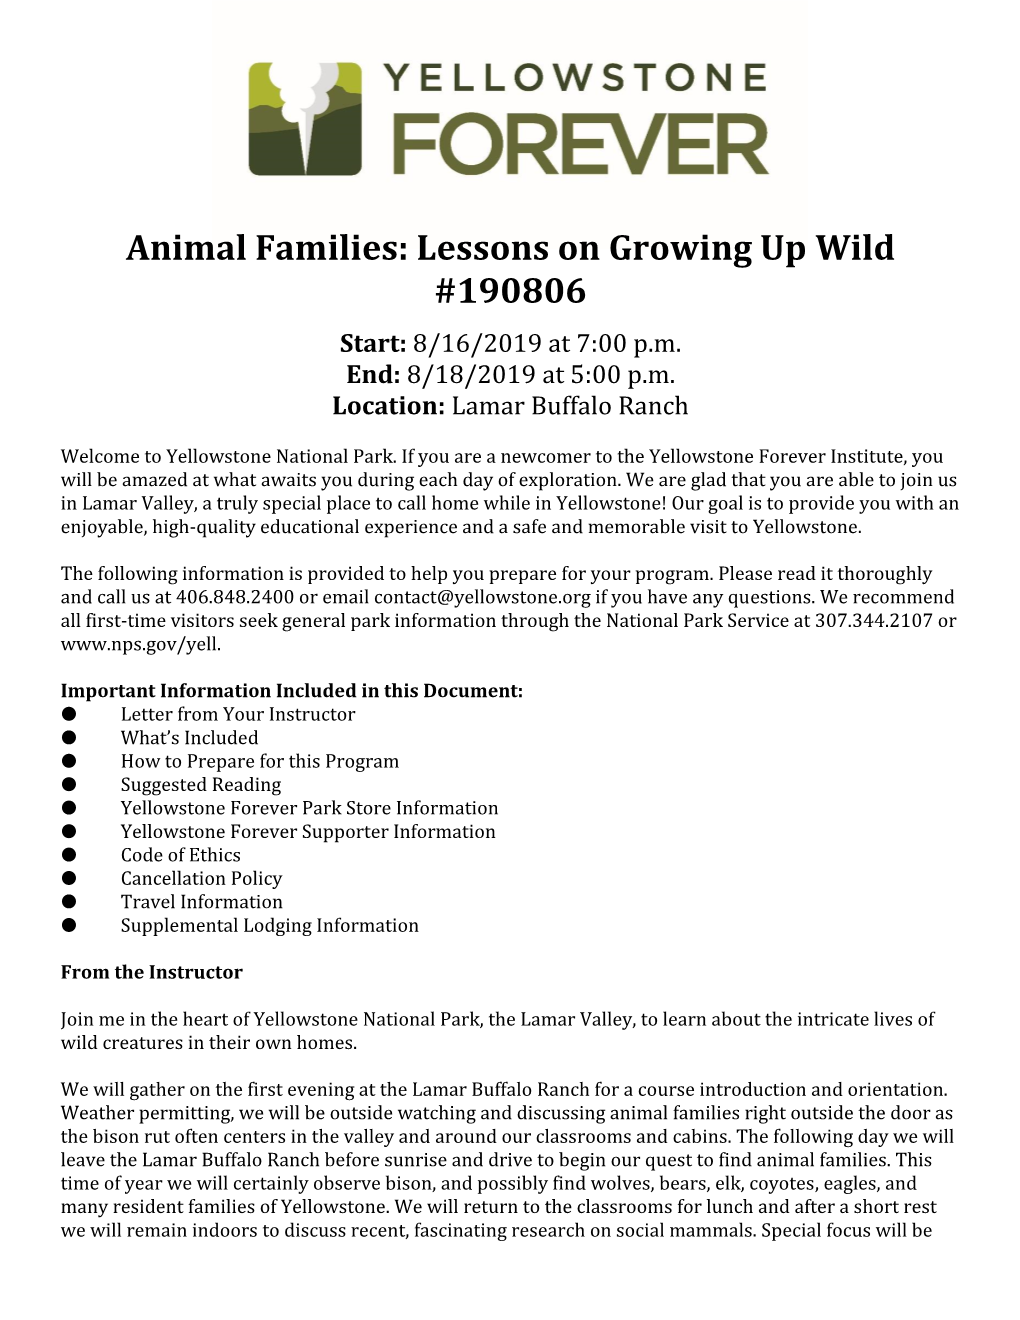 Animal Families: Lessons on Growing up Wild #190806